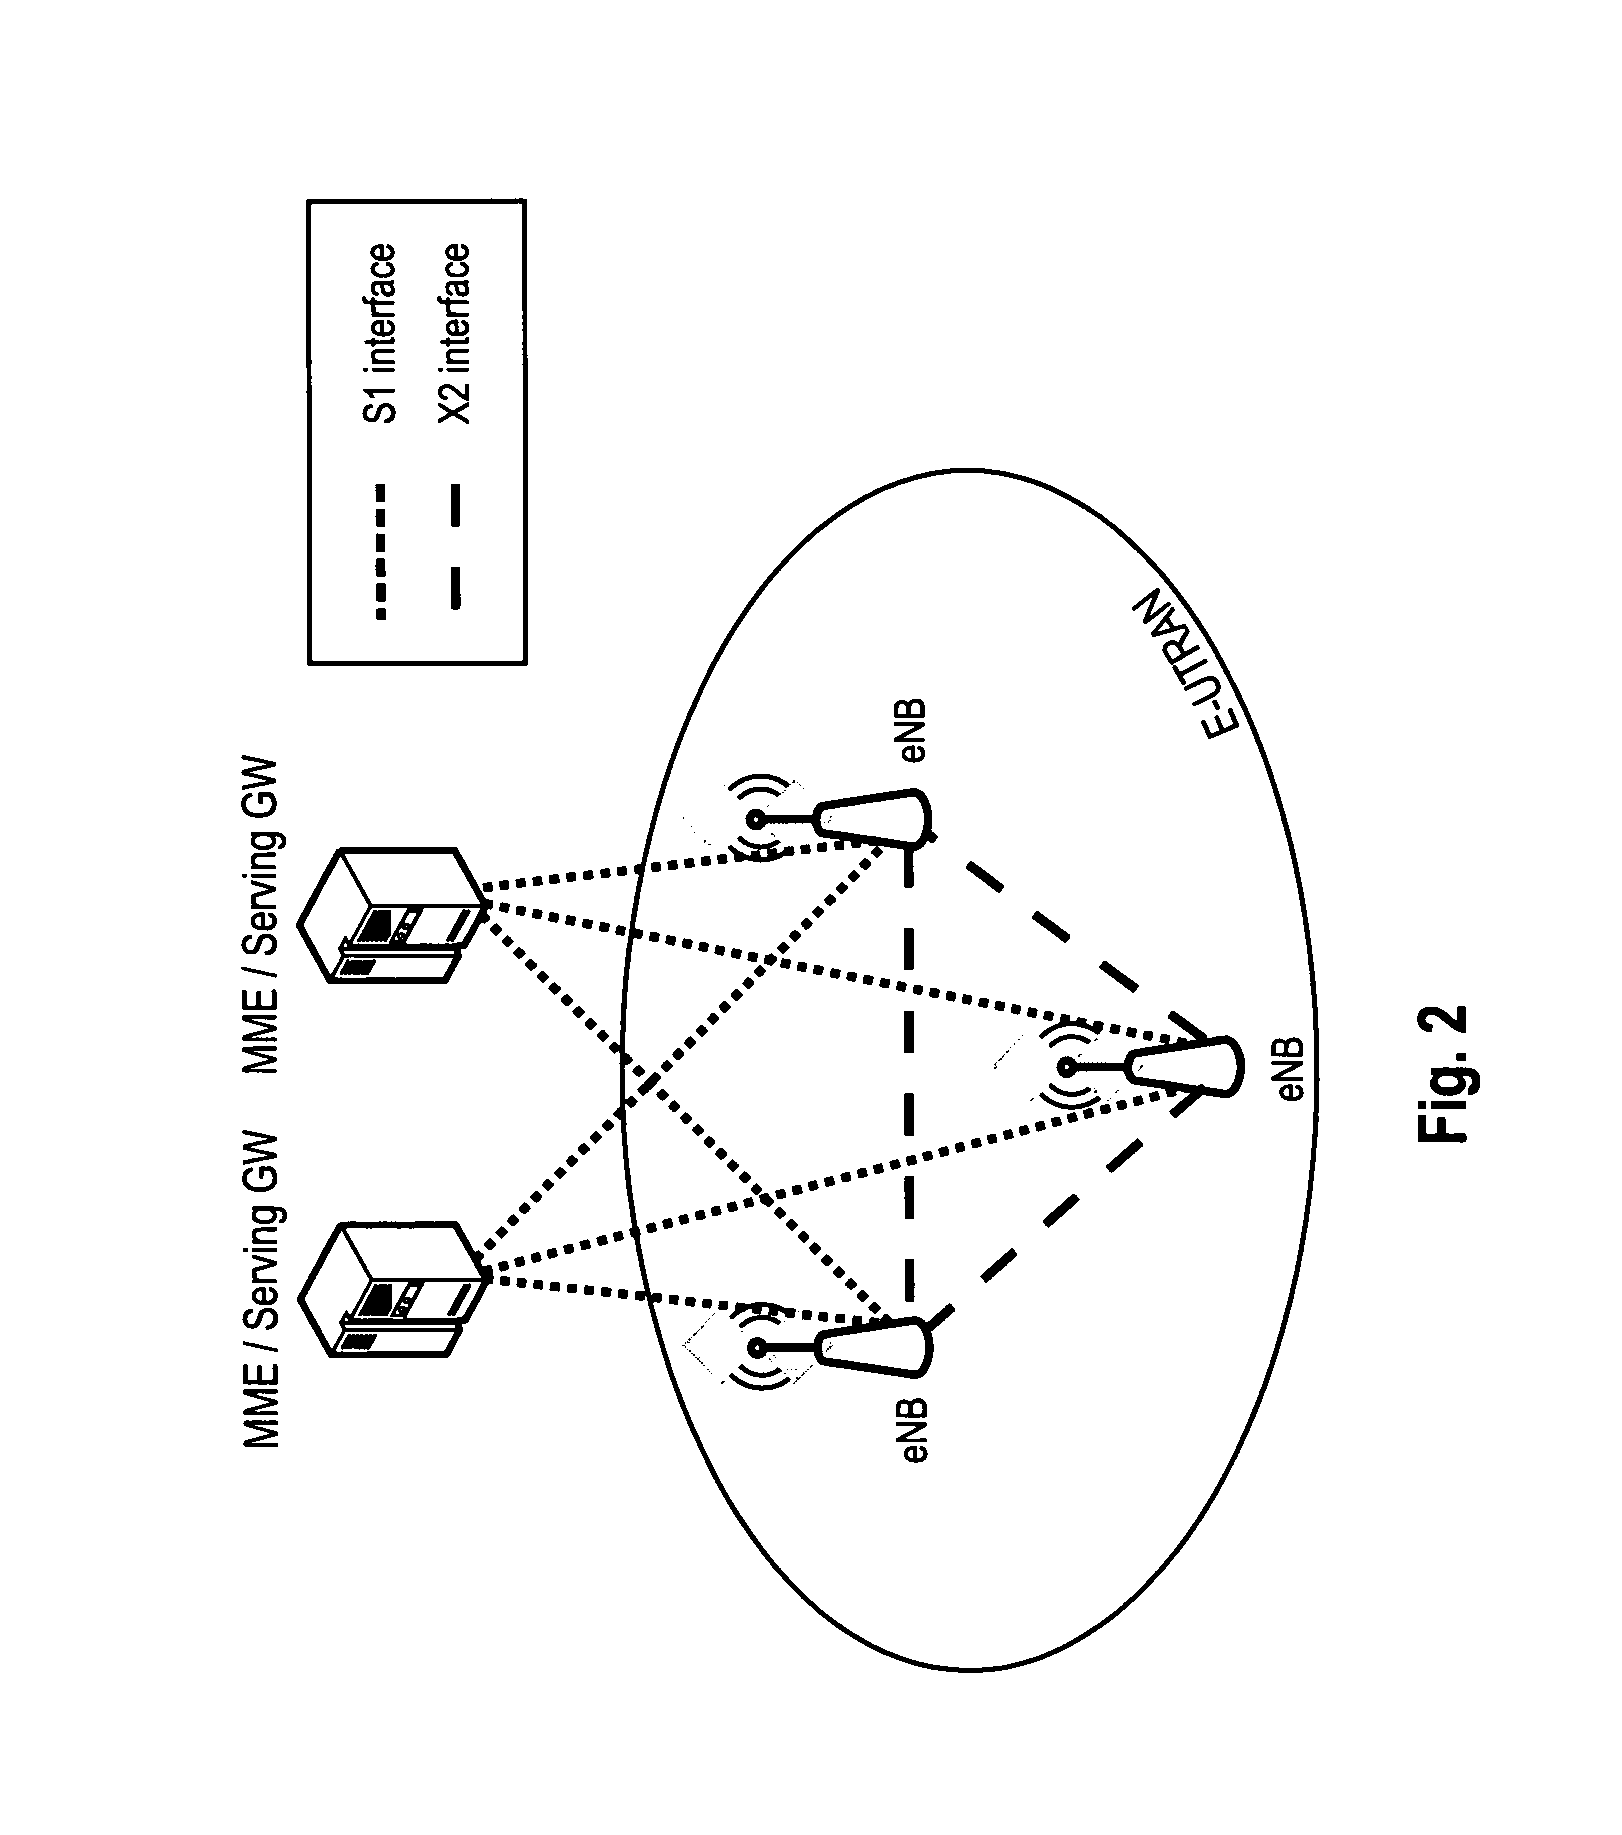 Transmit power control signaling for communication systems using carrier aggregation